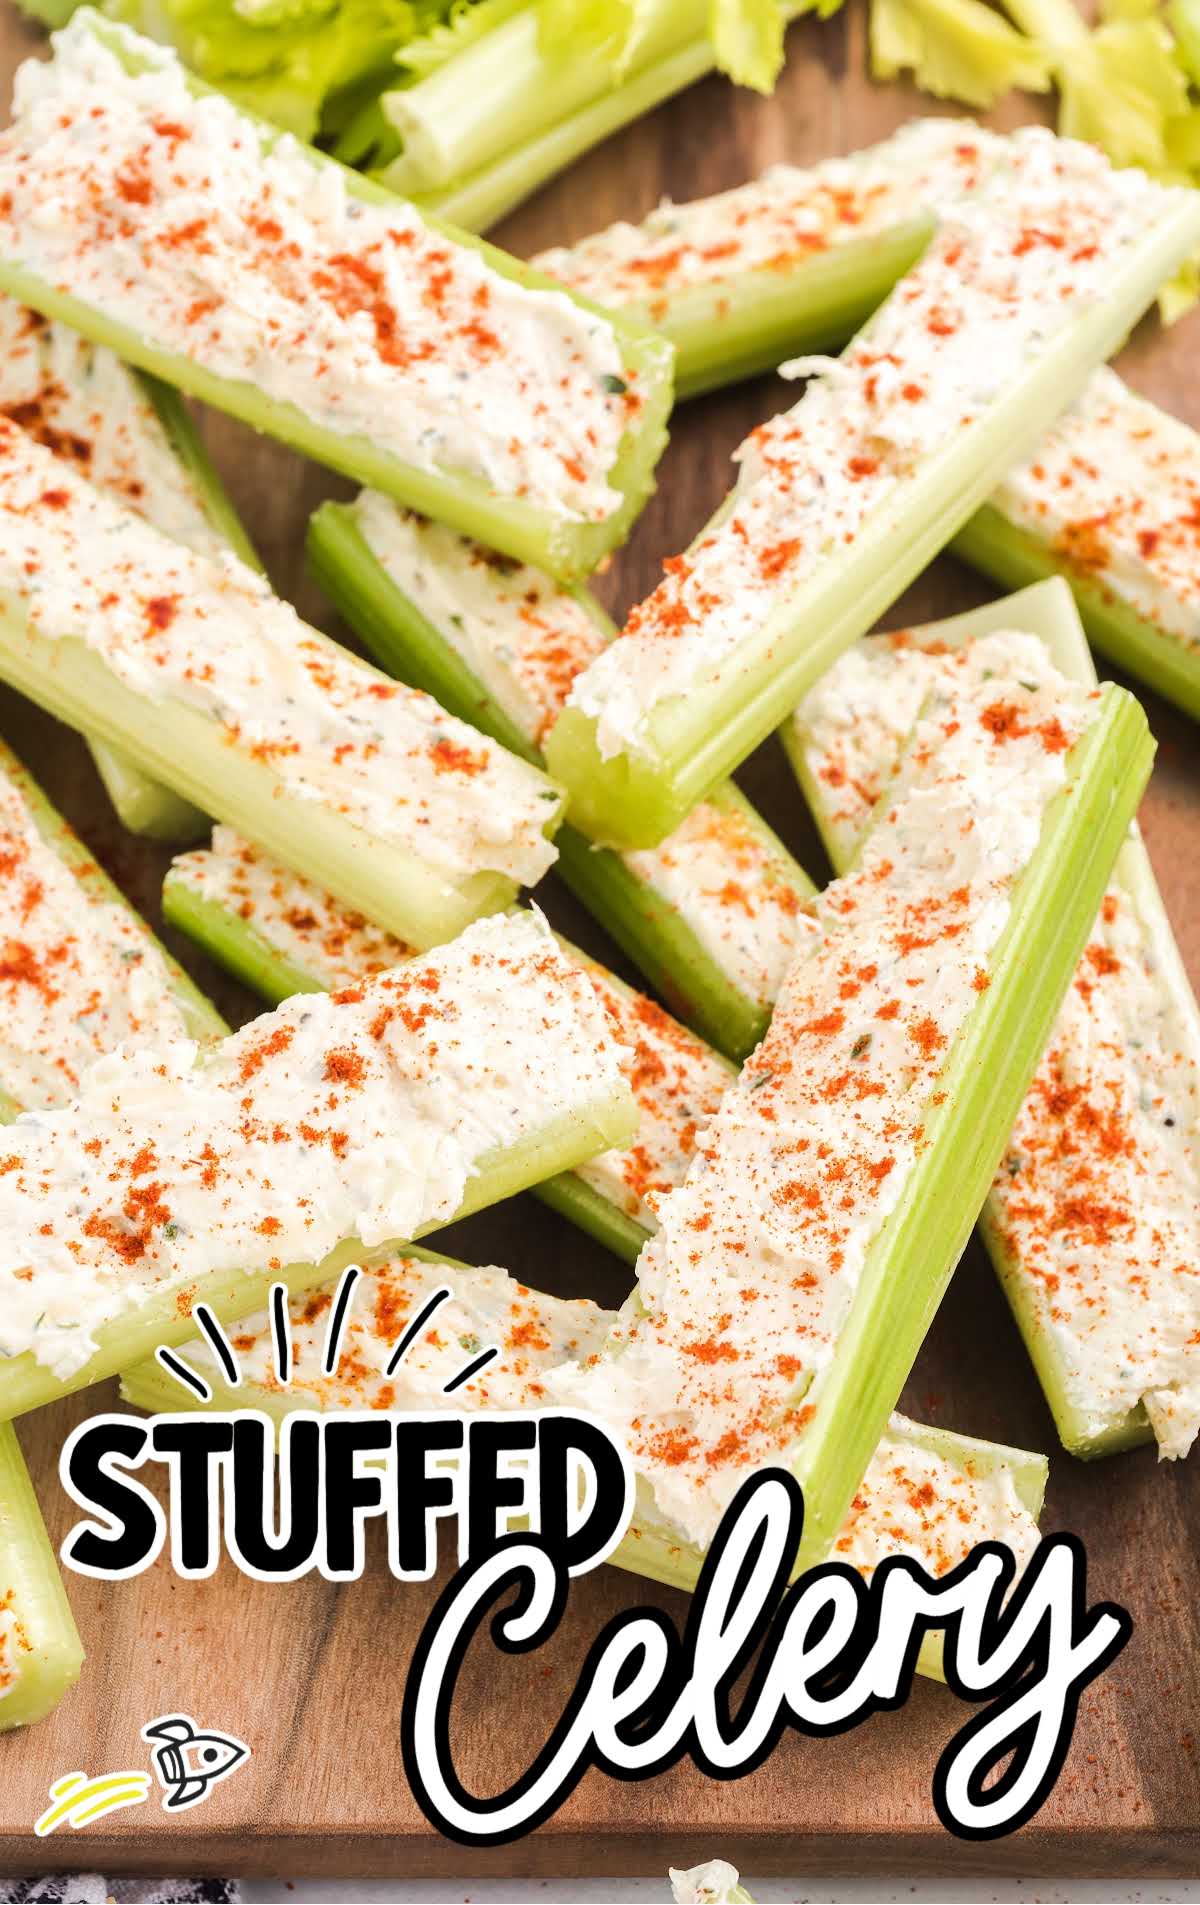 Celery stuffed with a cream cheese filling and topped with smoked paprika